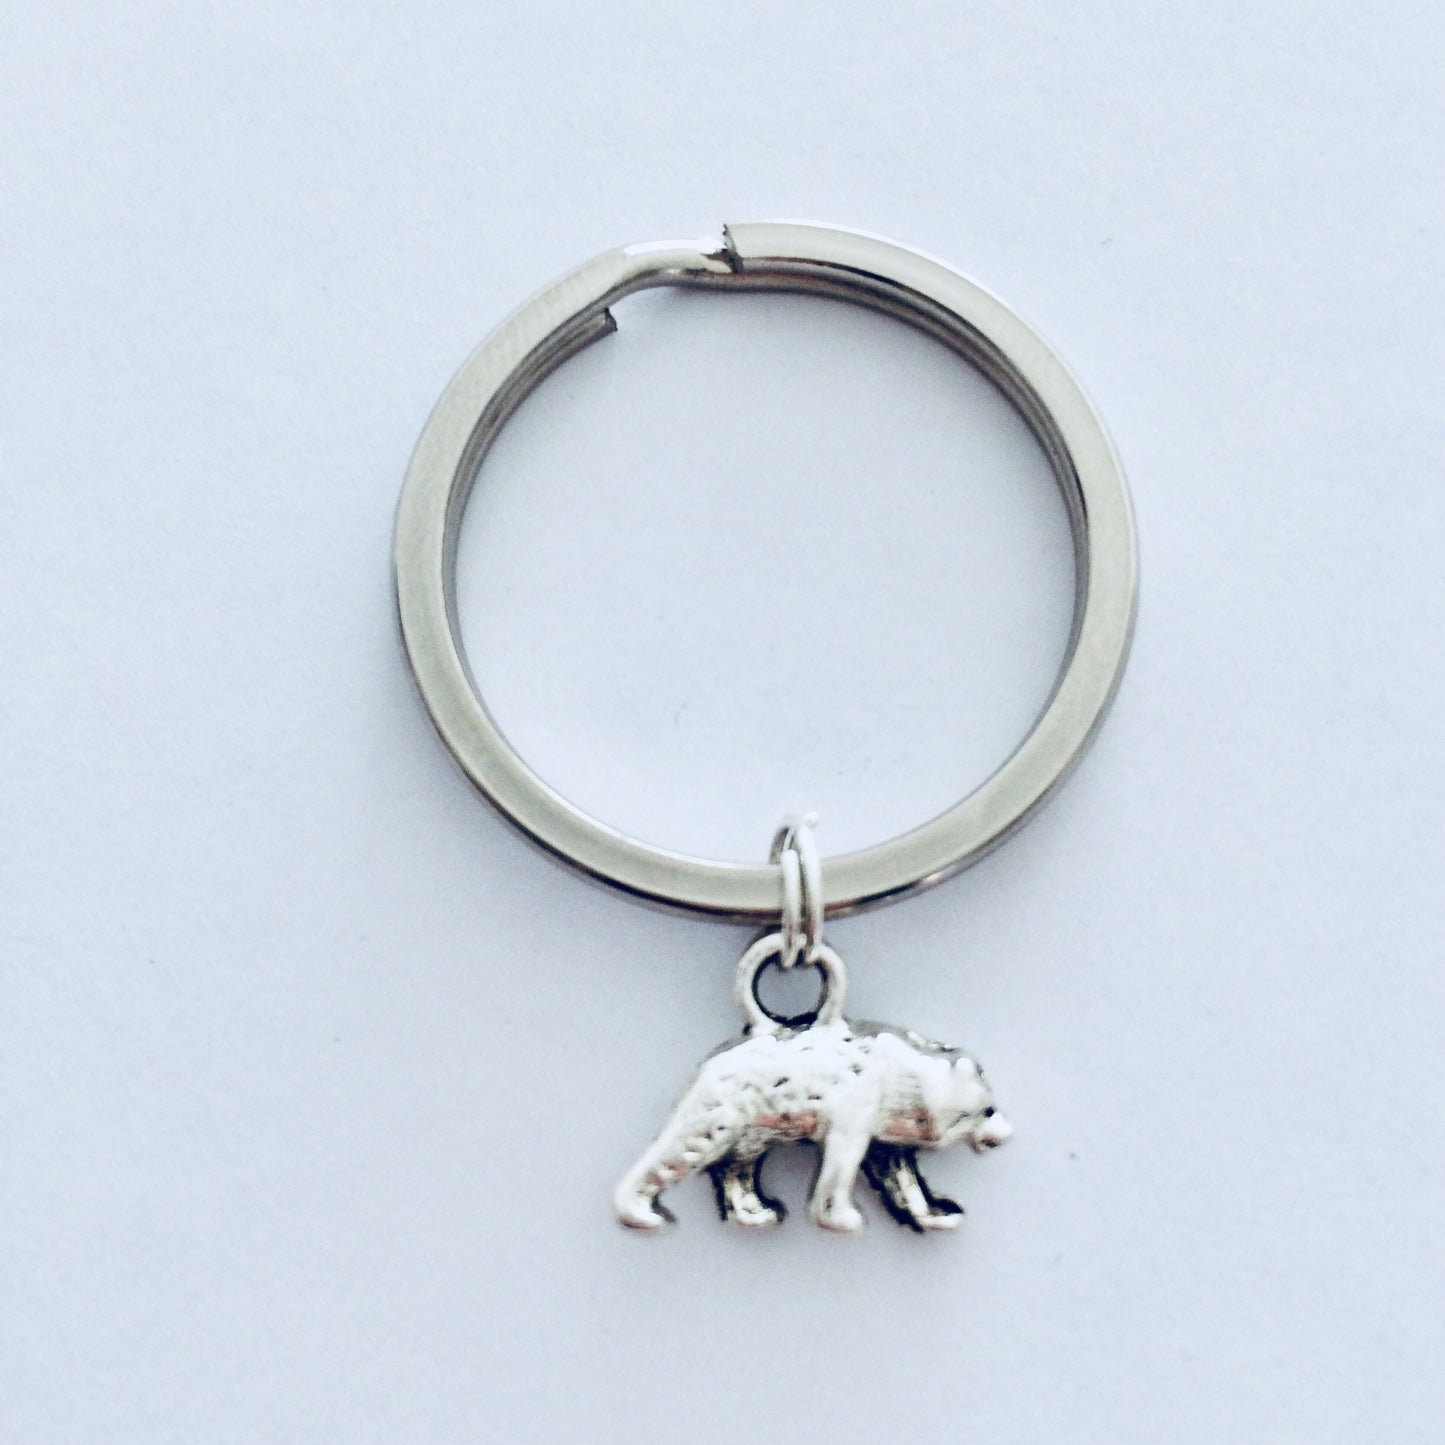 Bear Keychain, Bear Keyring, Grizzly Bear Gift, Nature Lover, Woodland Animals, Bear Related Gifts, Bear Lover, Cute Bear Keychain, For Her.